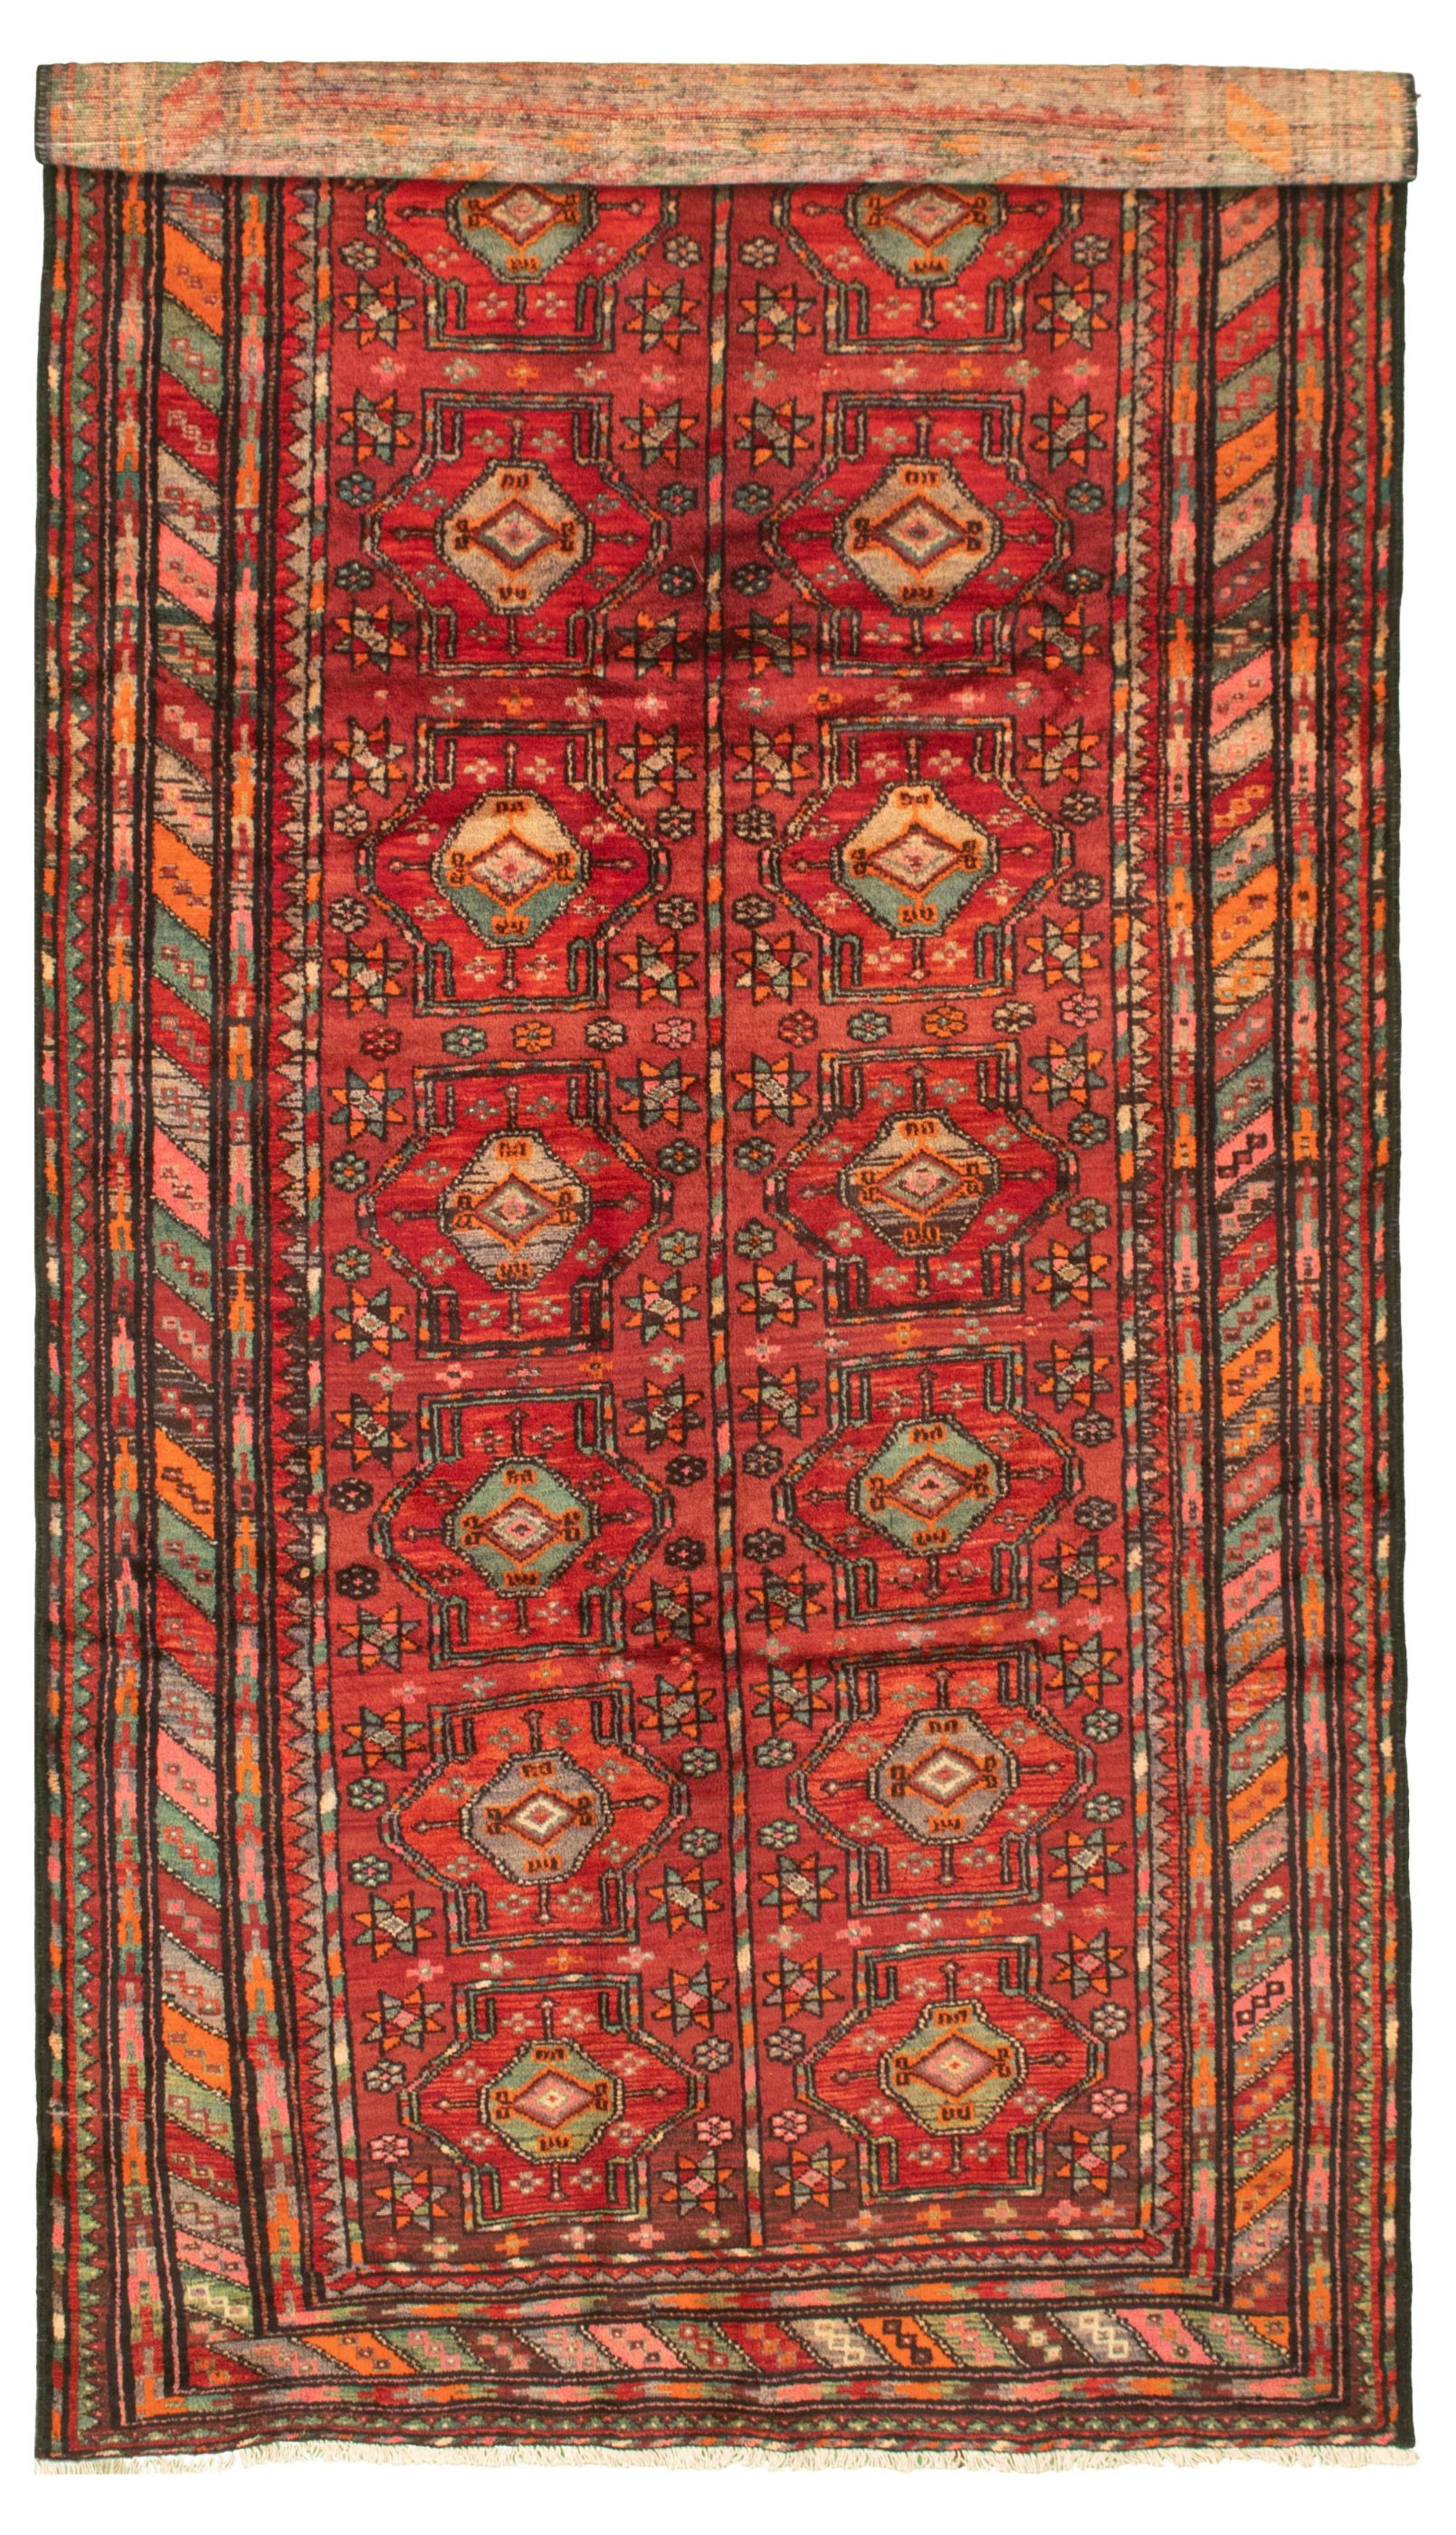 Hand-knotted Authentic Turkish Red Wool Rug 5'2" x 10'6" Size: 5'2" x 10'6"  